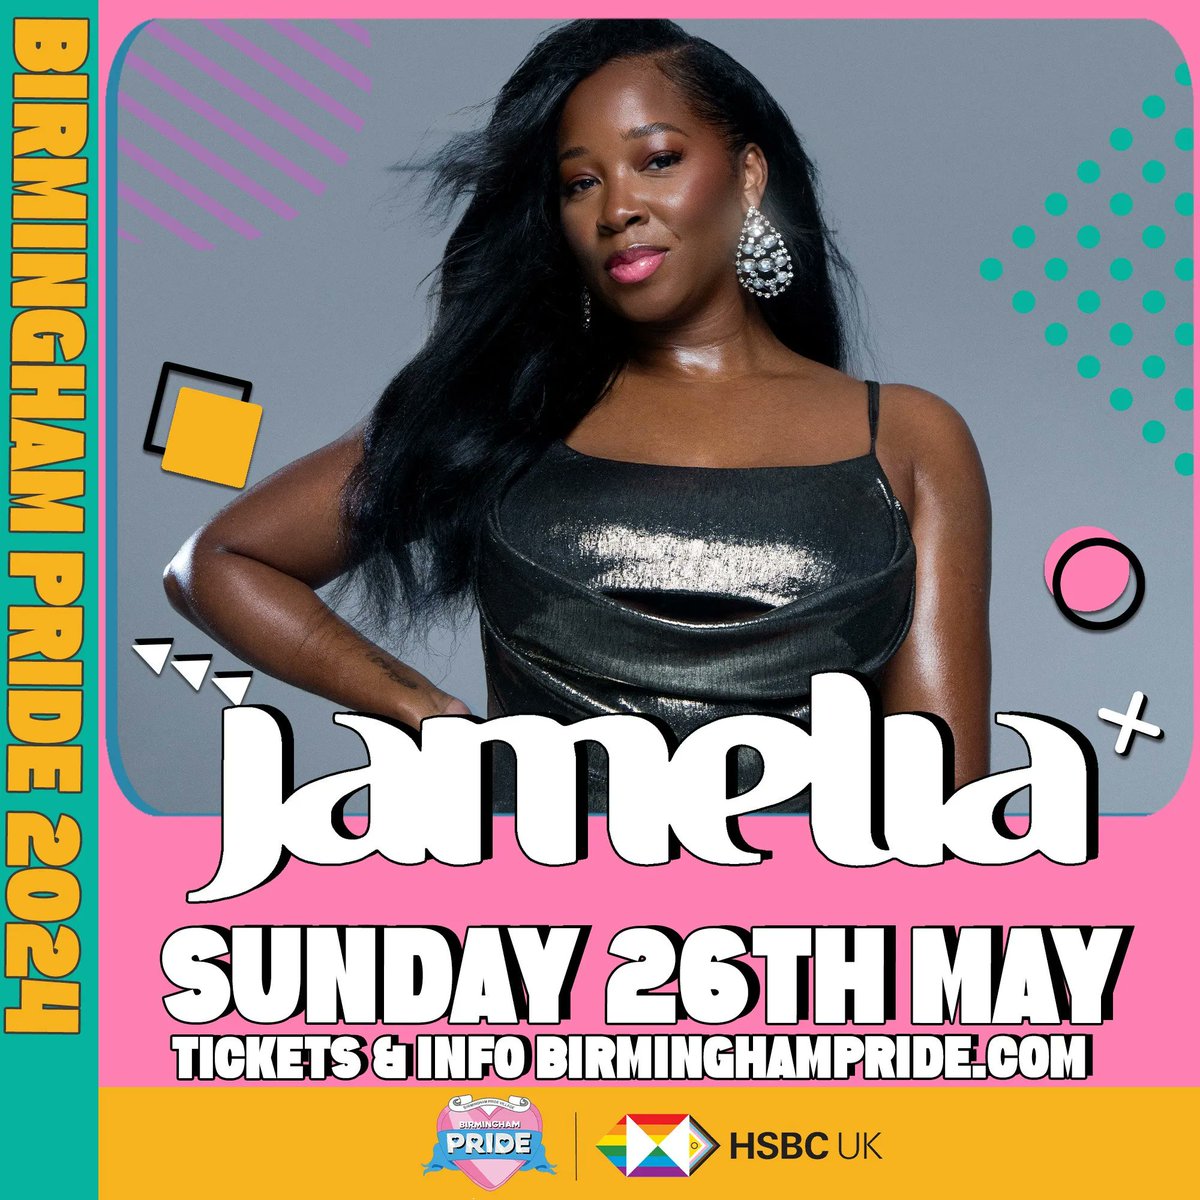 SOON: Birmingham Pride May 24 plus FREE Ticketed Big Community Event at Smithfield Live May 25/26 including Parade, Festival & Street Party ft @BRB @Beverleyknight & @Jamelia Tickets via @BirminghamPride: birminghampride.com #Birmingham #BrumHour